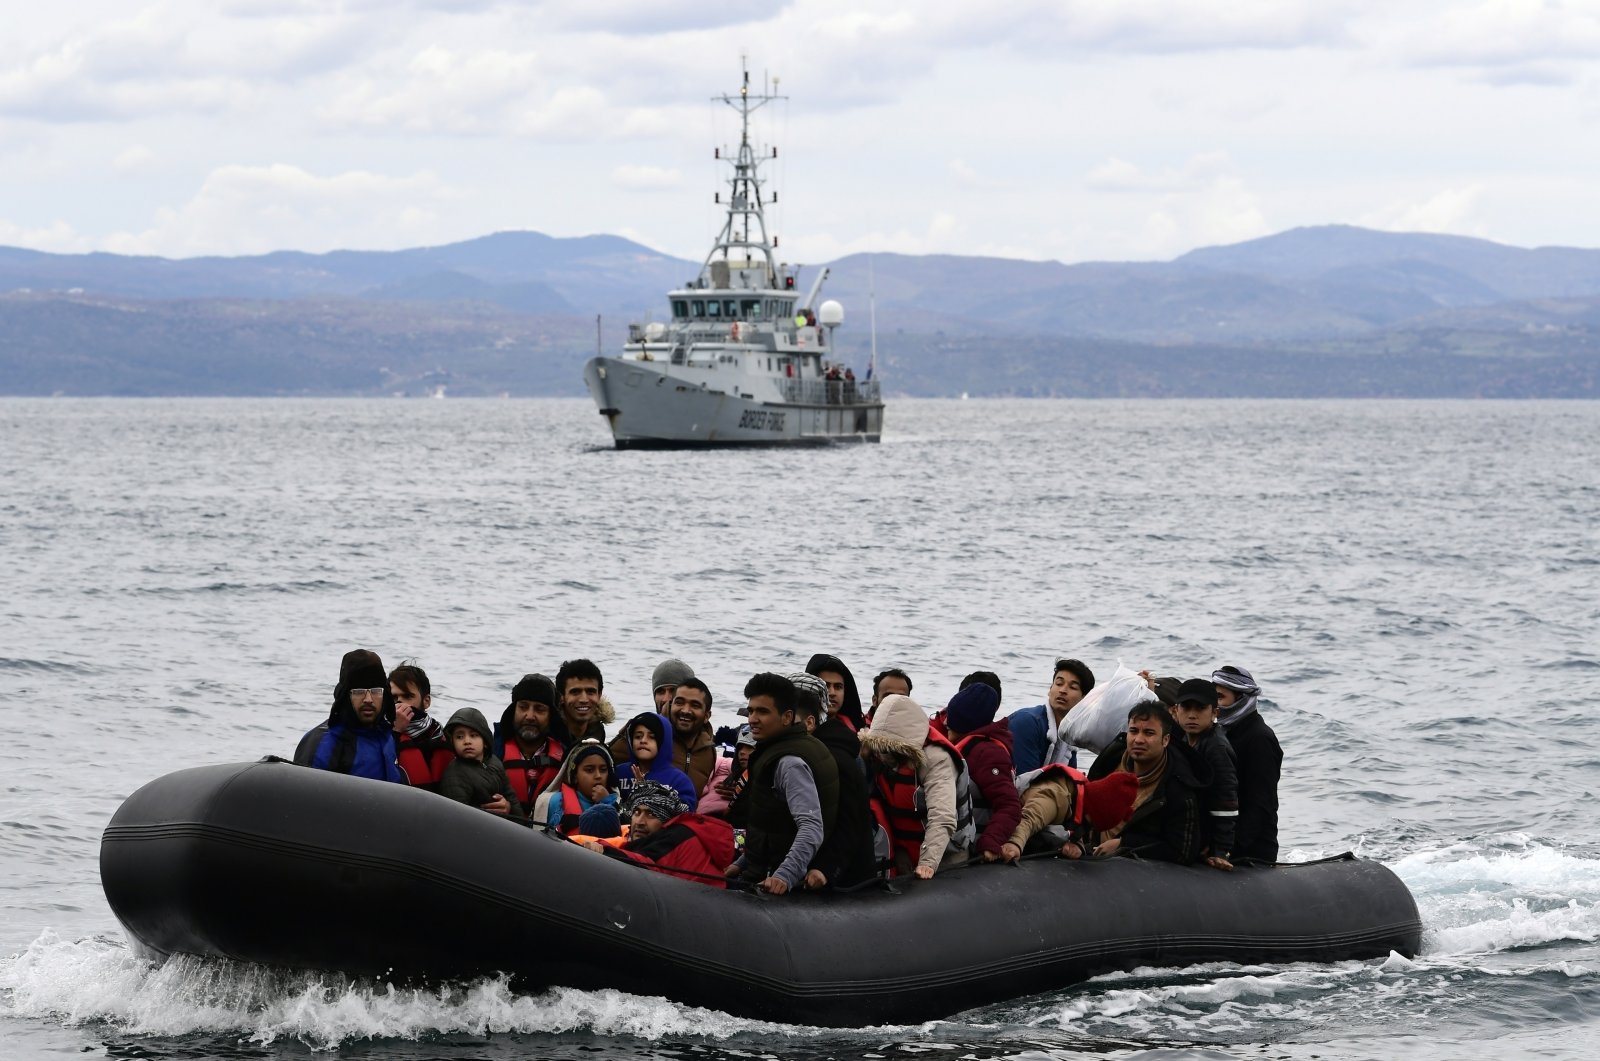 Refugees and migrants arrive in a dinghy accompanied by Frontex vessels at the village of Skala Sikaminias, on the Greek island of Lesbos, after crossing the Aegean Sea from Turkey, Feb. 28, 2020. (AP File Photo)